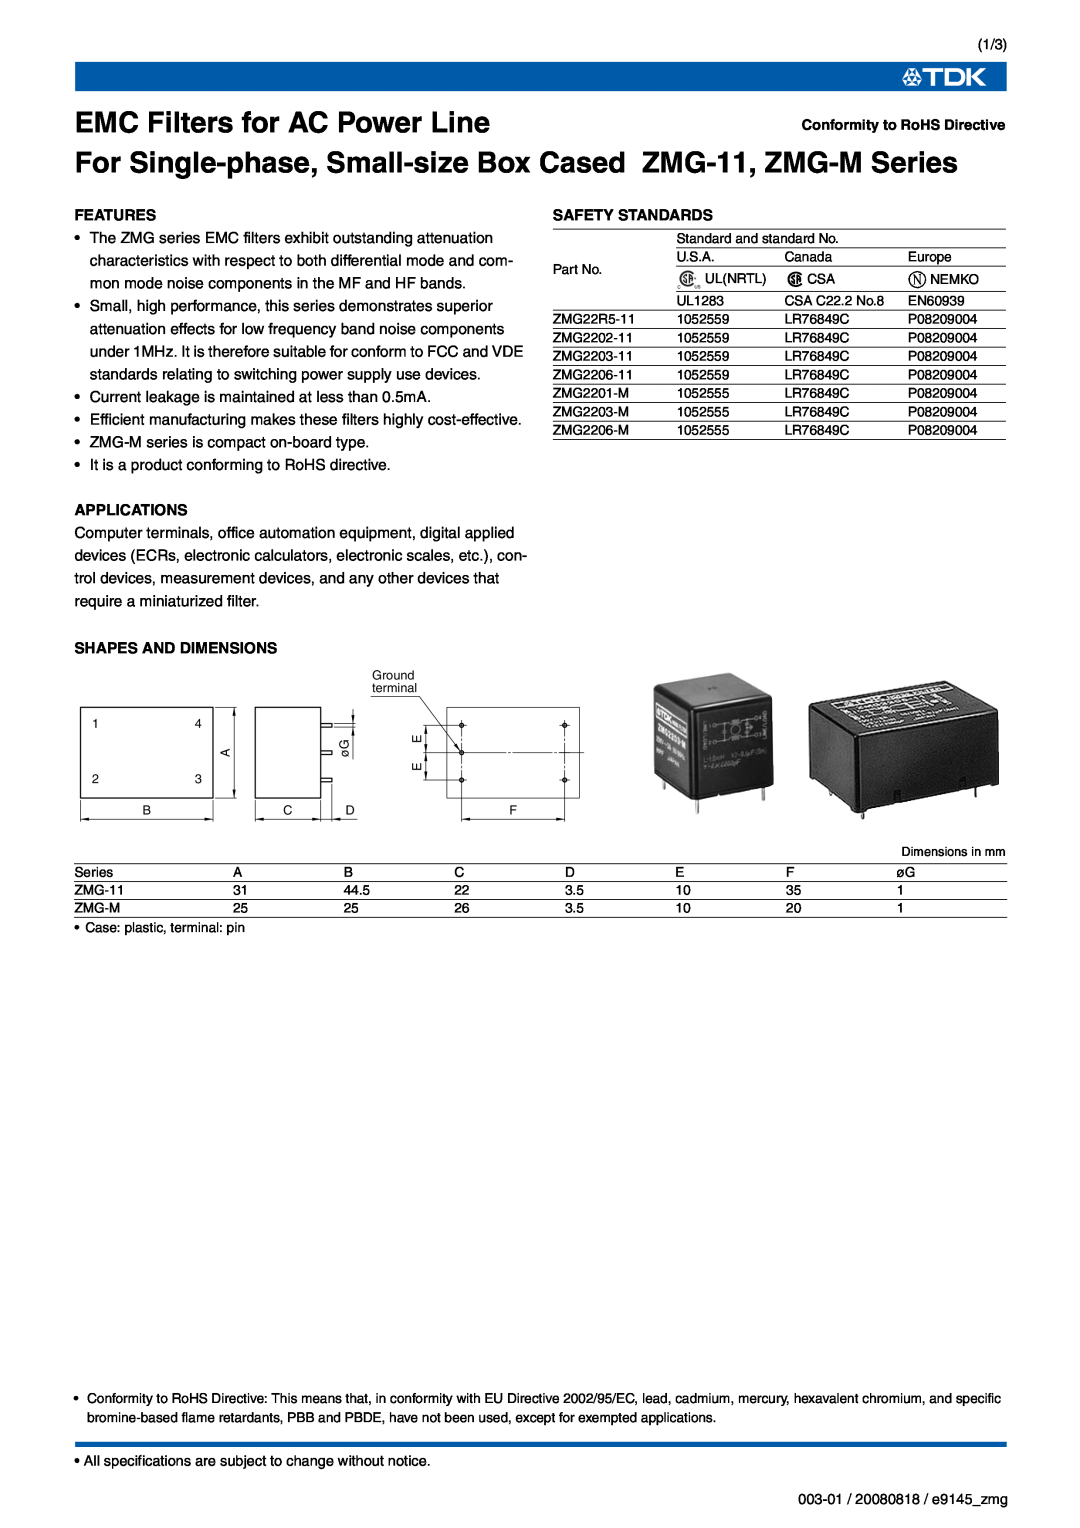 TDK ZMG2206-11, ZMG-M Series specifications Conformity to RoHS Directive, Features, Applications, Shapes And Dimensions 